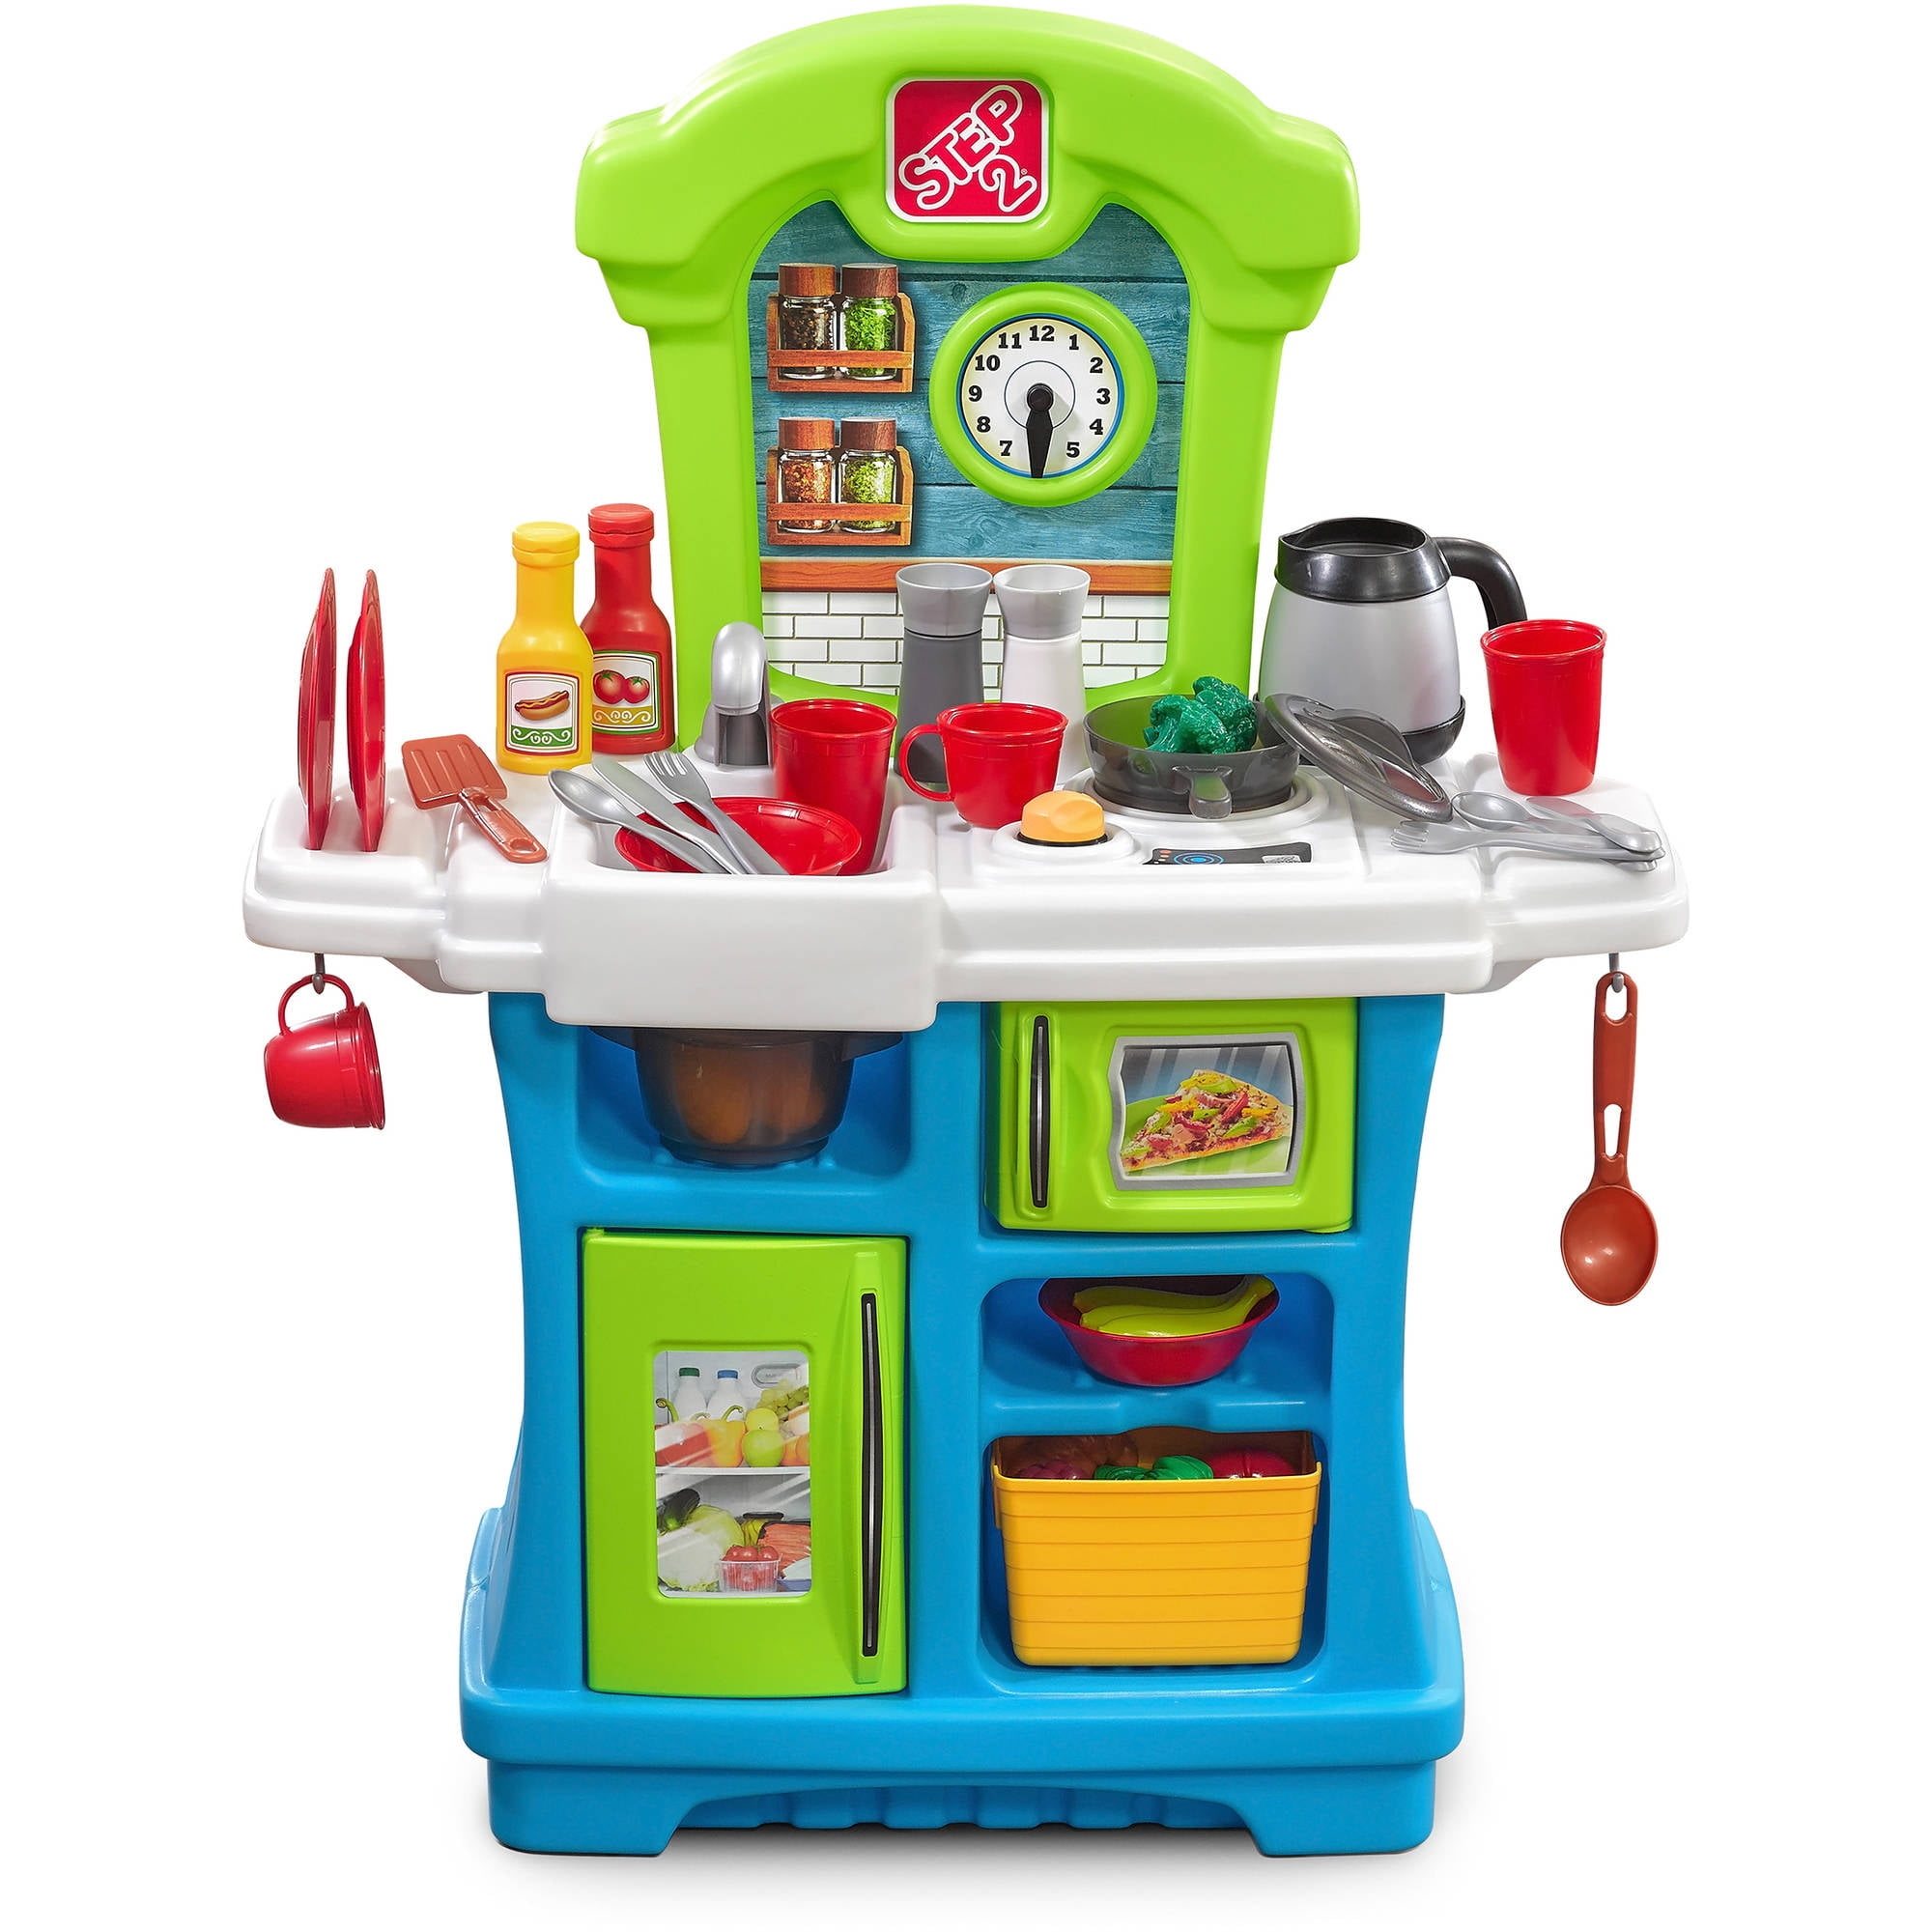 Step2 488599 Kids Plastic Cooking Kitchen Playset for sale online 